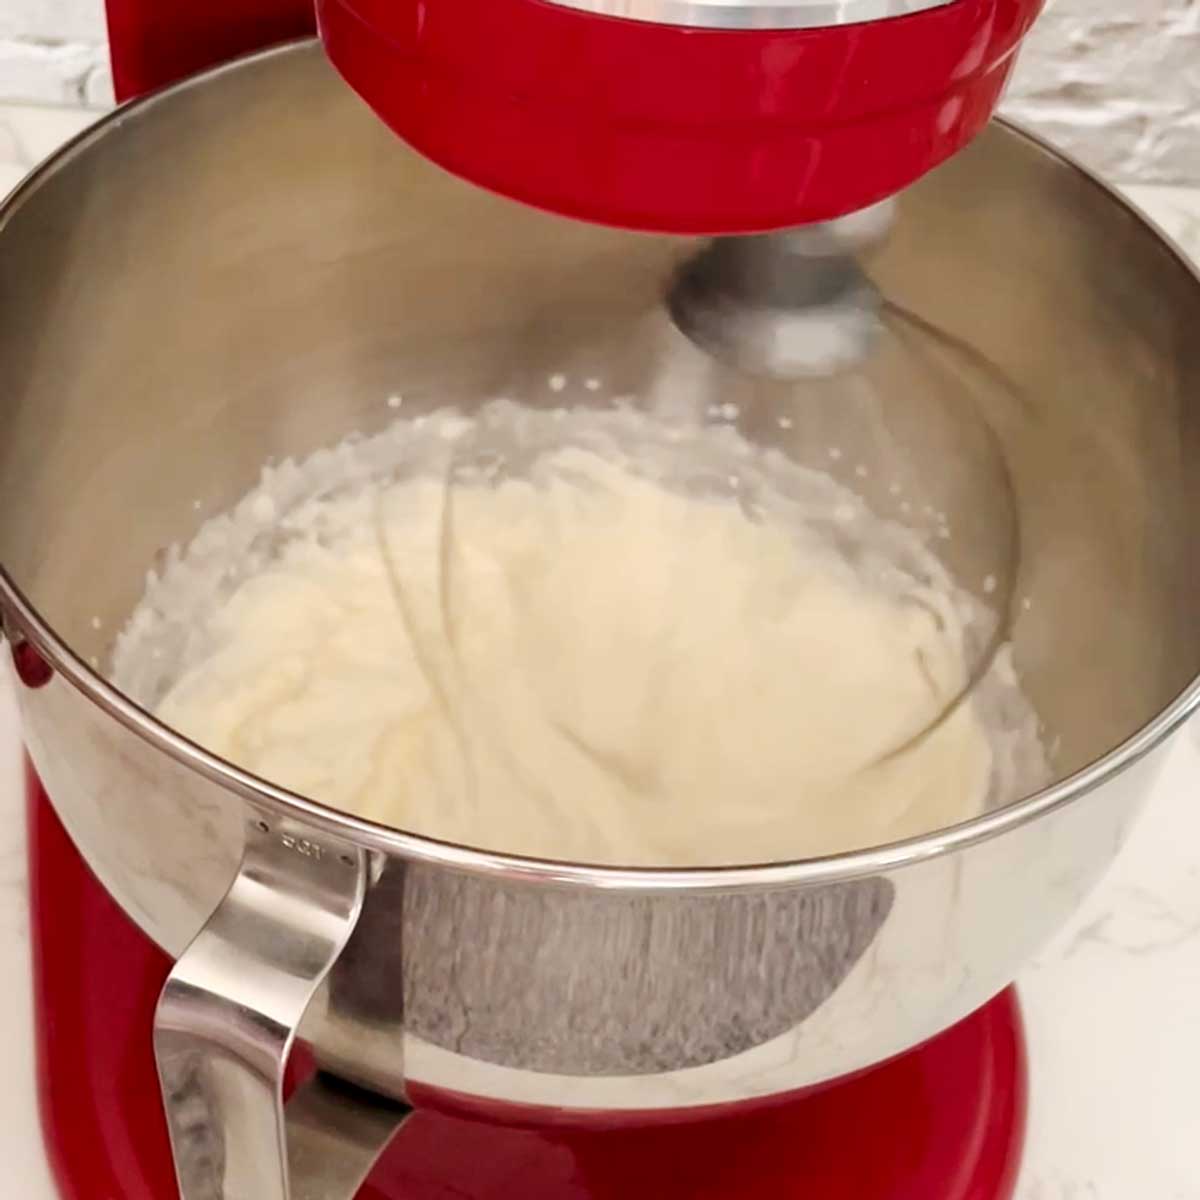 Cream whipped by stand mixer.